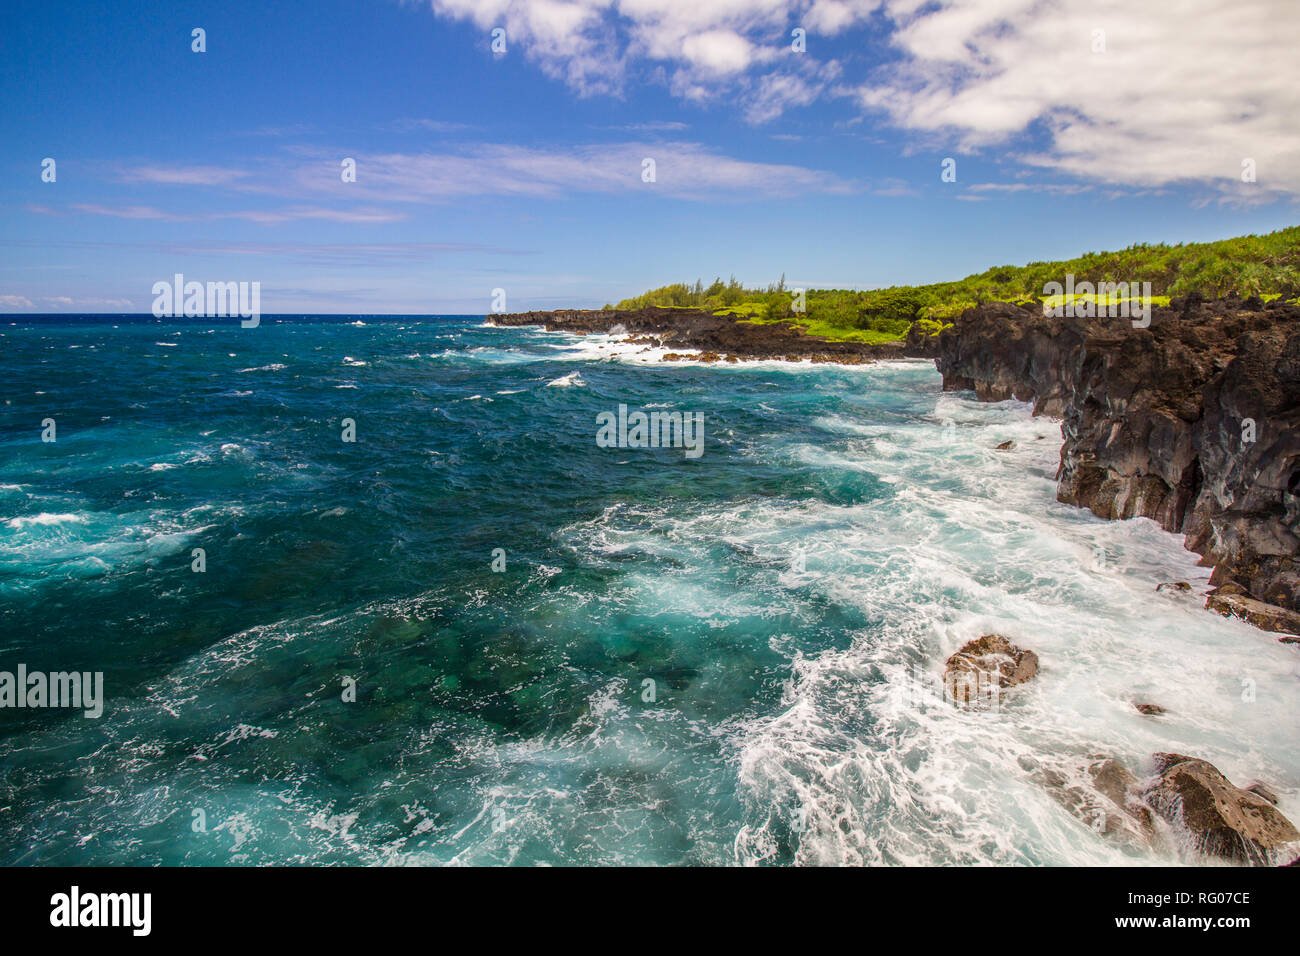 Dramatic view of the pacific shore at Maui, Hawaii Stock Photo